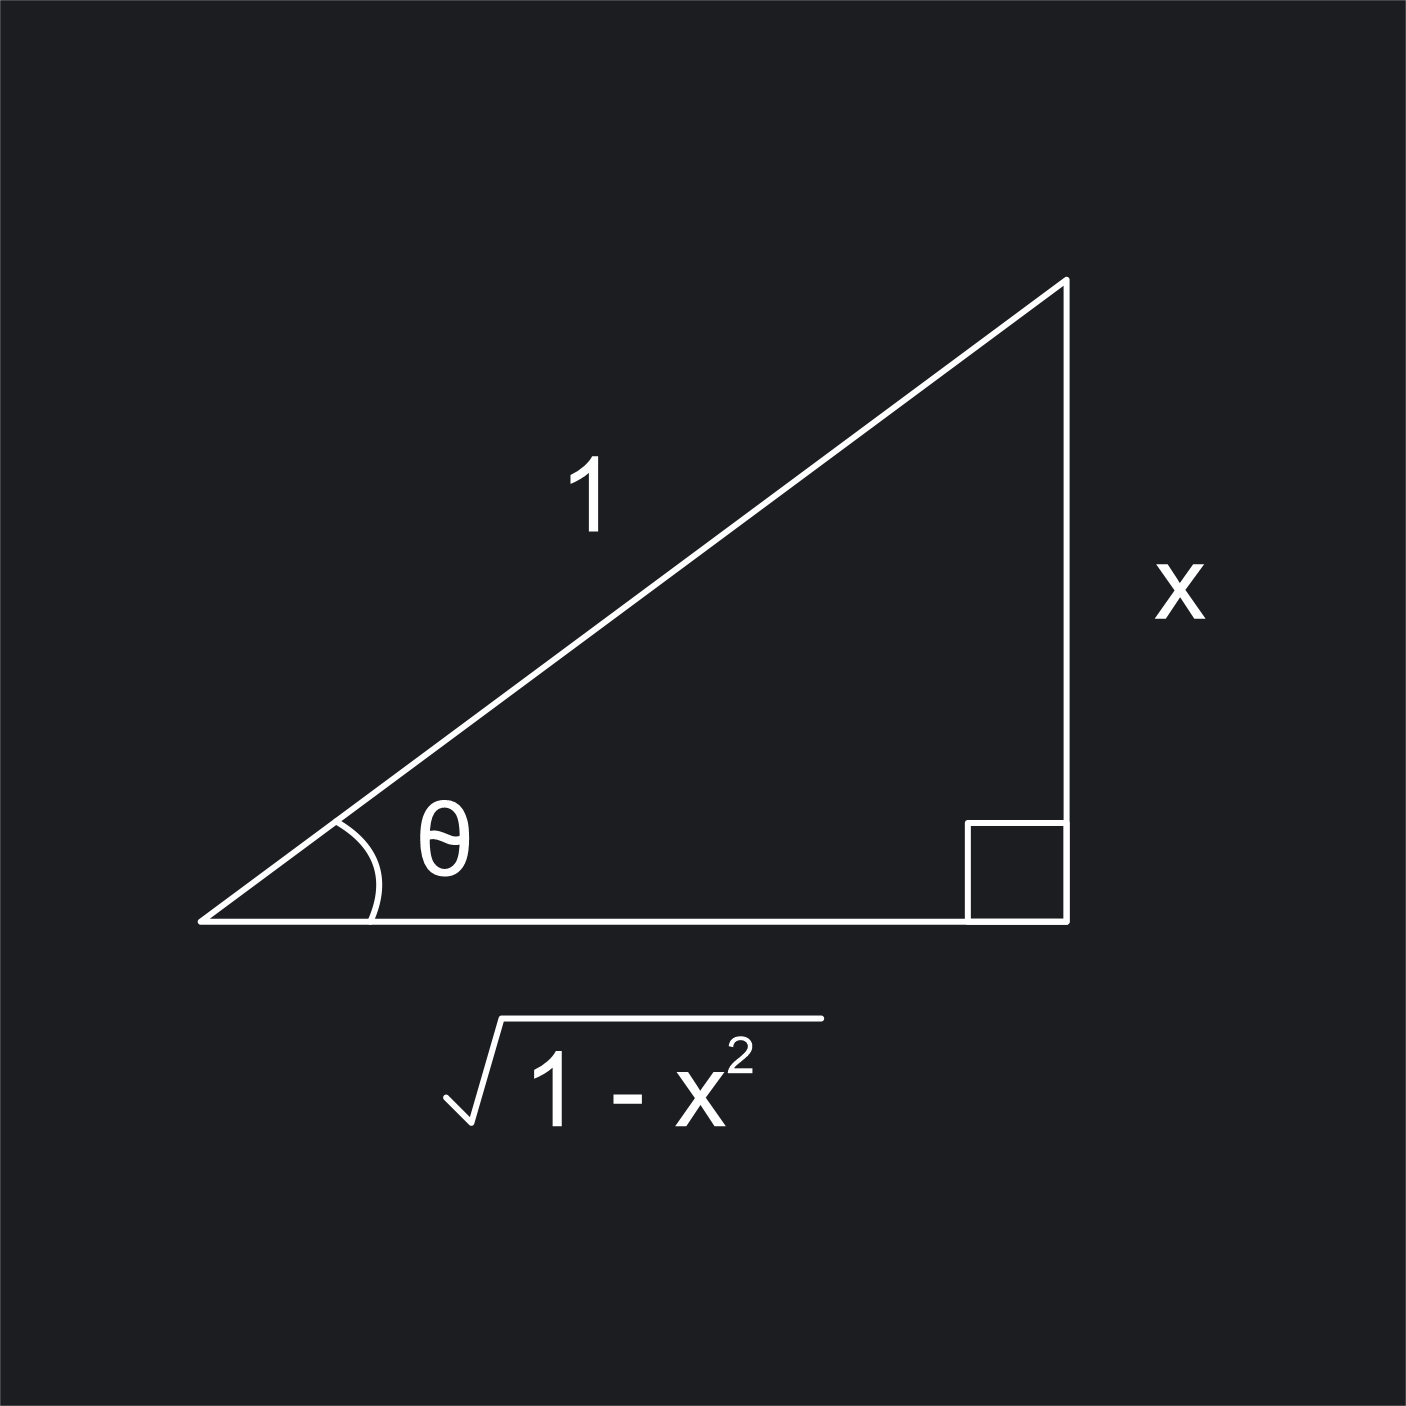 A triangle where you can calculate all sides using the Pythagorean theorem